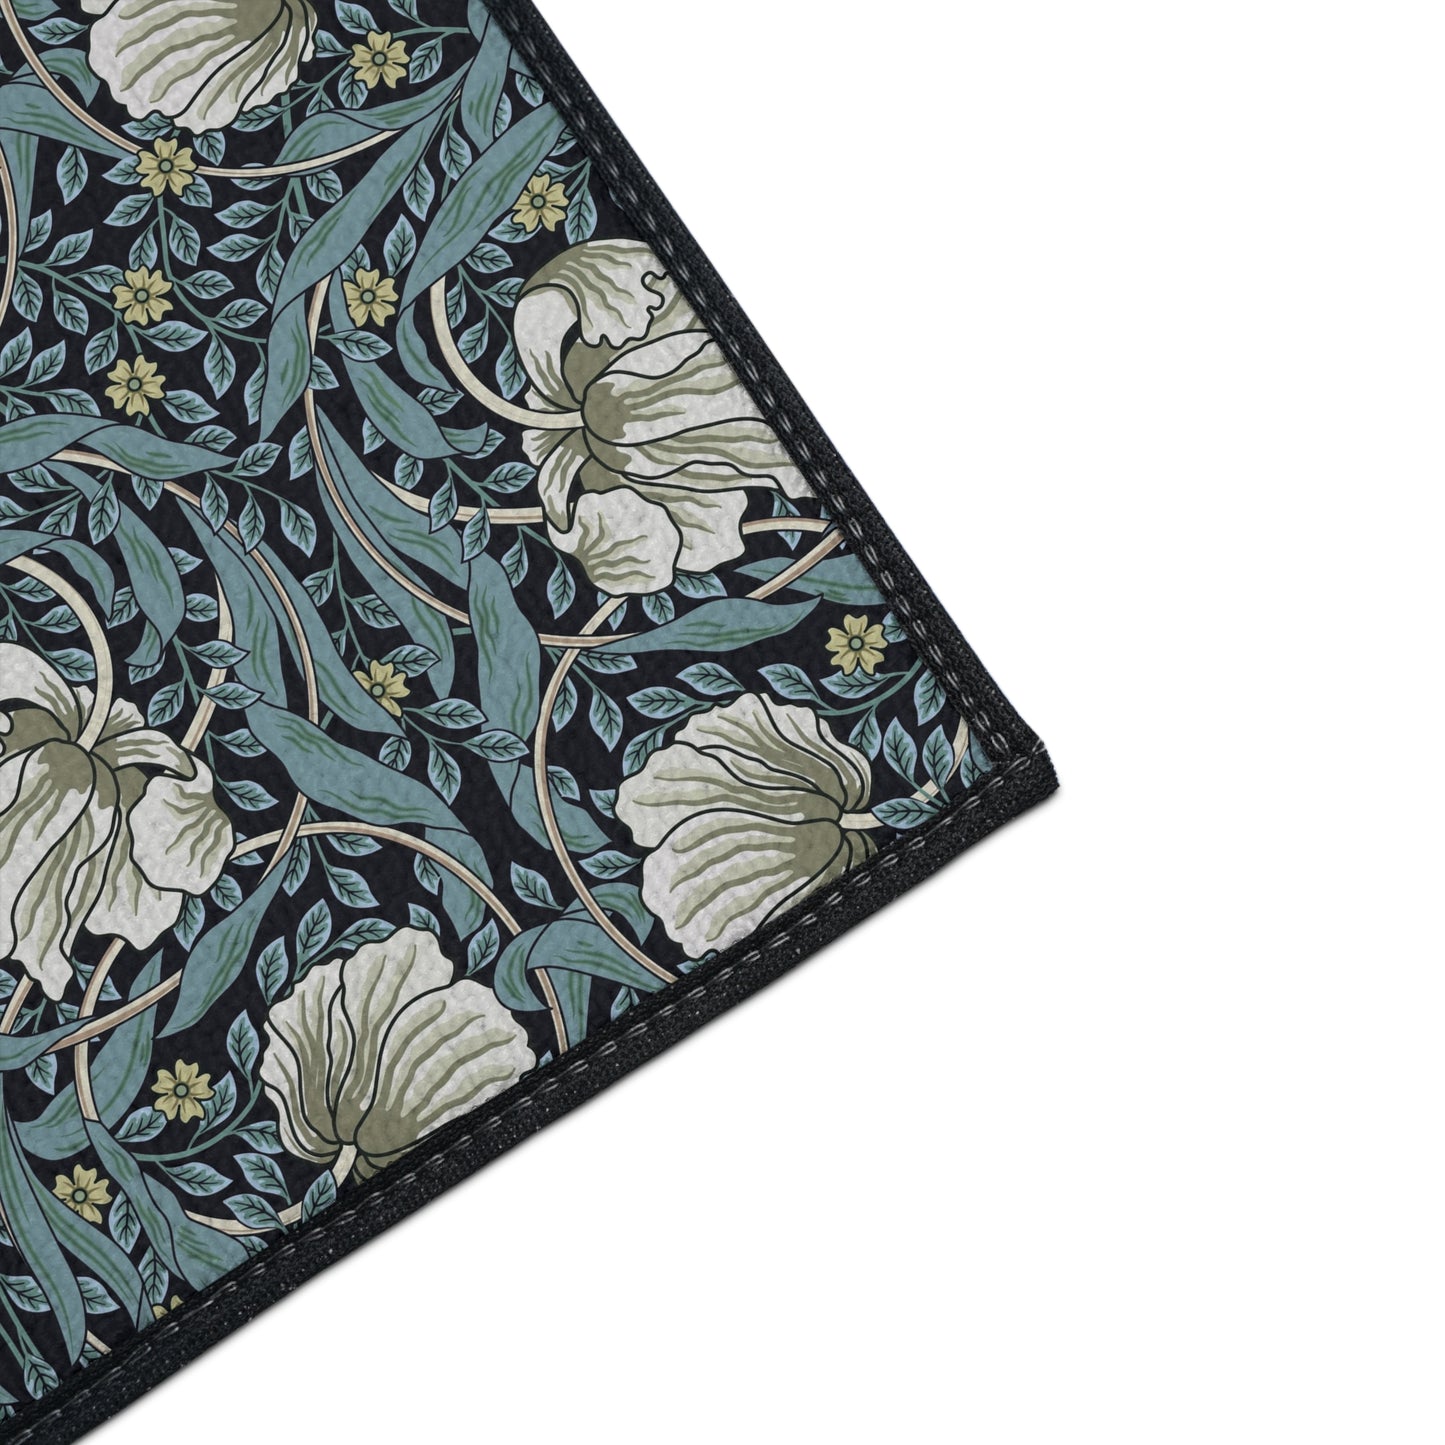 william-morris-co-heavy-duty-floor-mat-pimpernel-collection-slate-26